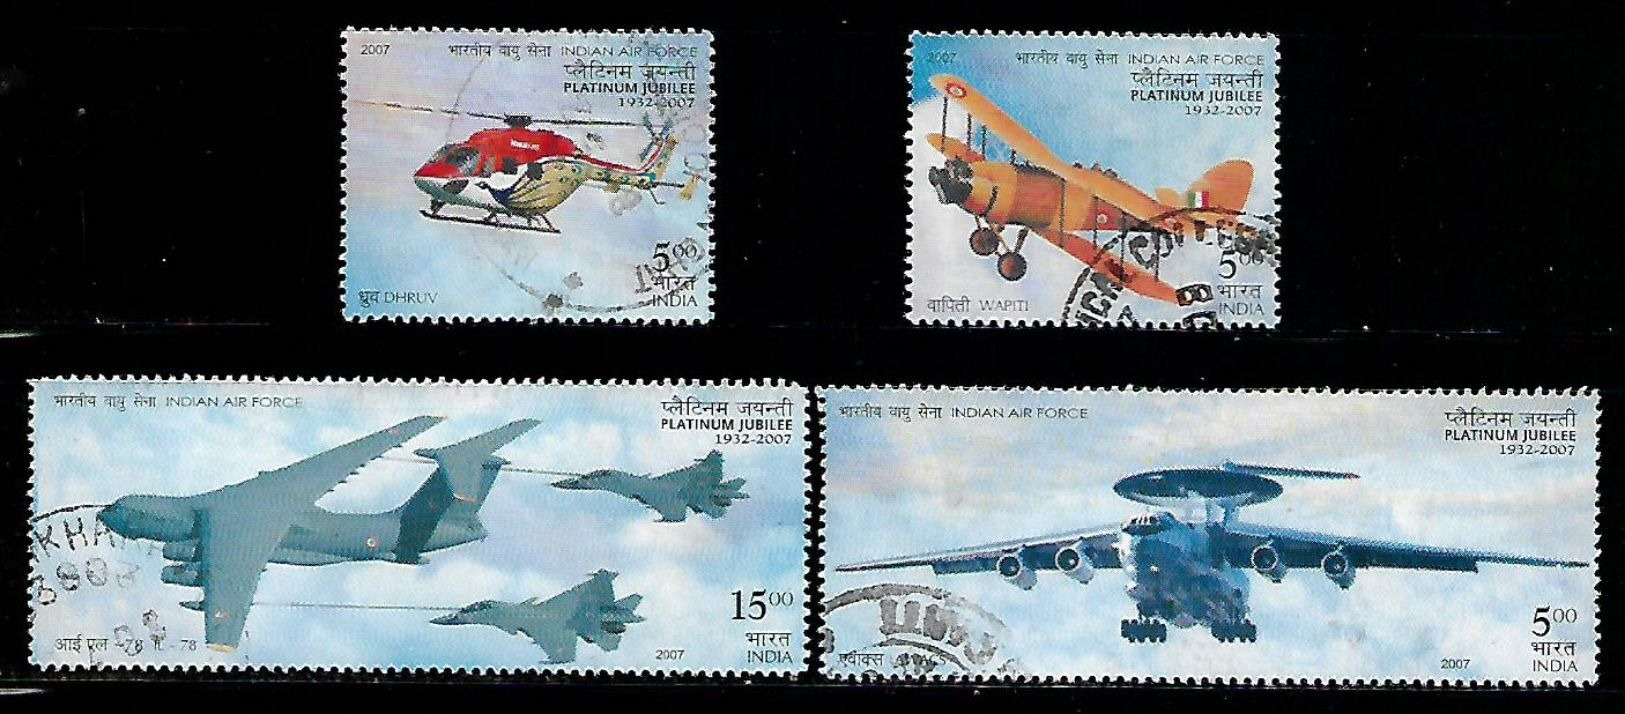 India 2007 Platinum Jubilee Of Indian Air Force Helicopter Airplane Aviation Used Stamp # A:134 - Oblitérés